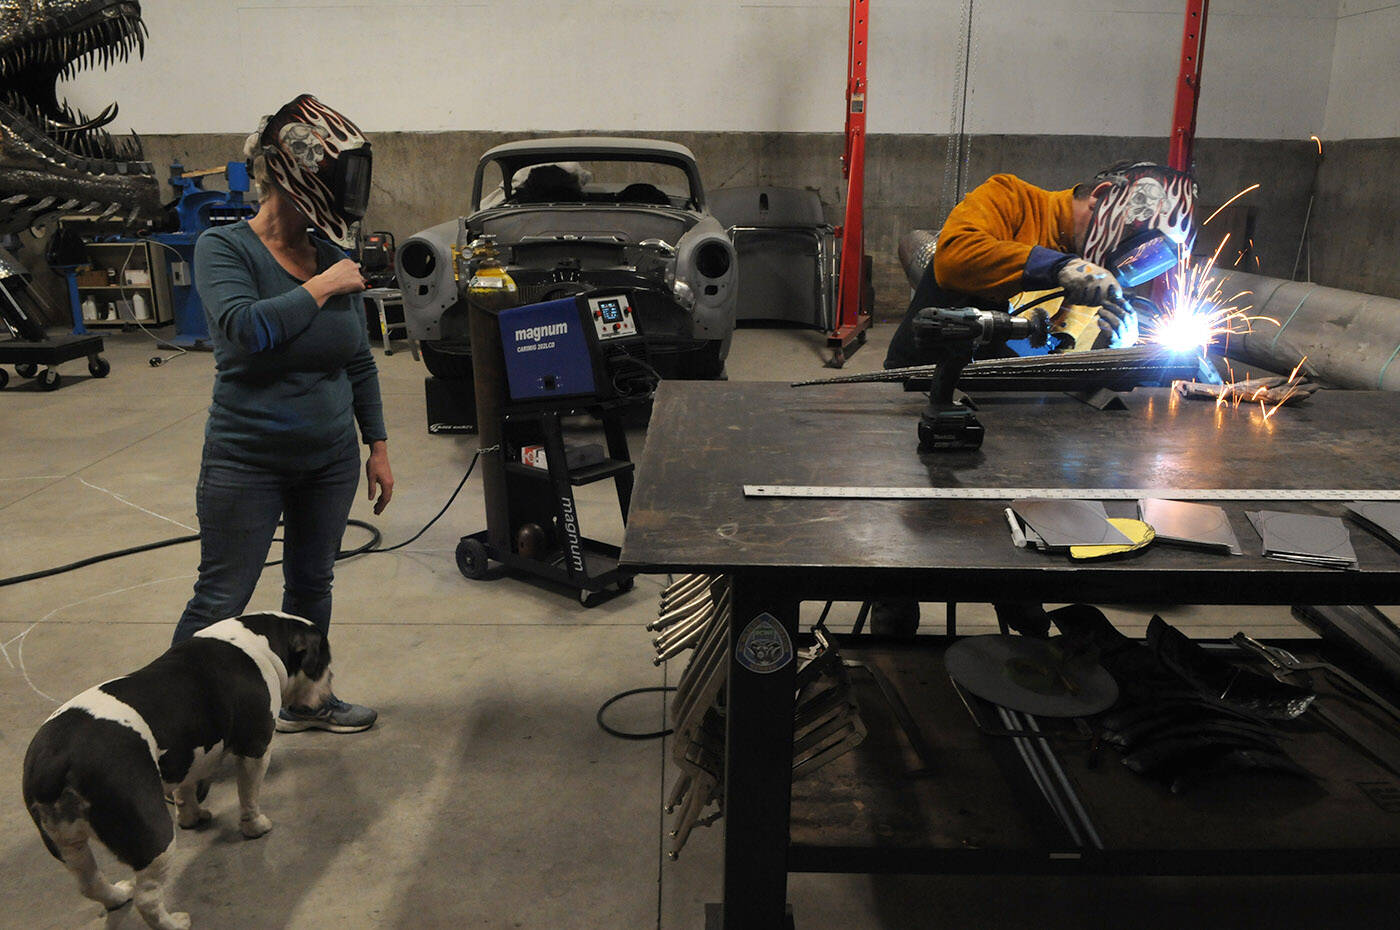 Michelle Stone watches as husband Kevin welds a piece of metal on Nov. 5, 2021. (Jenna Hauck/ Chilliwack Progress)